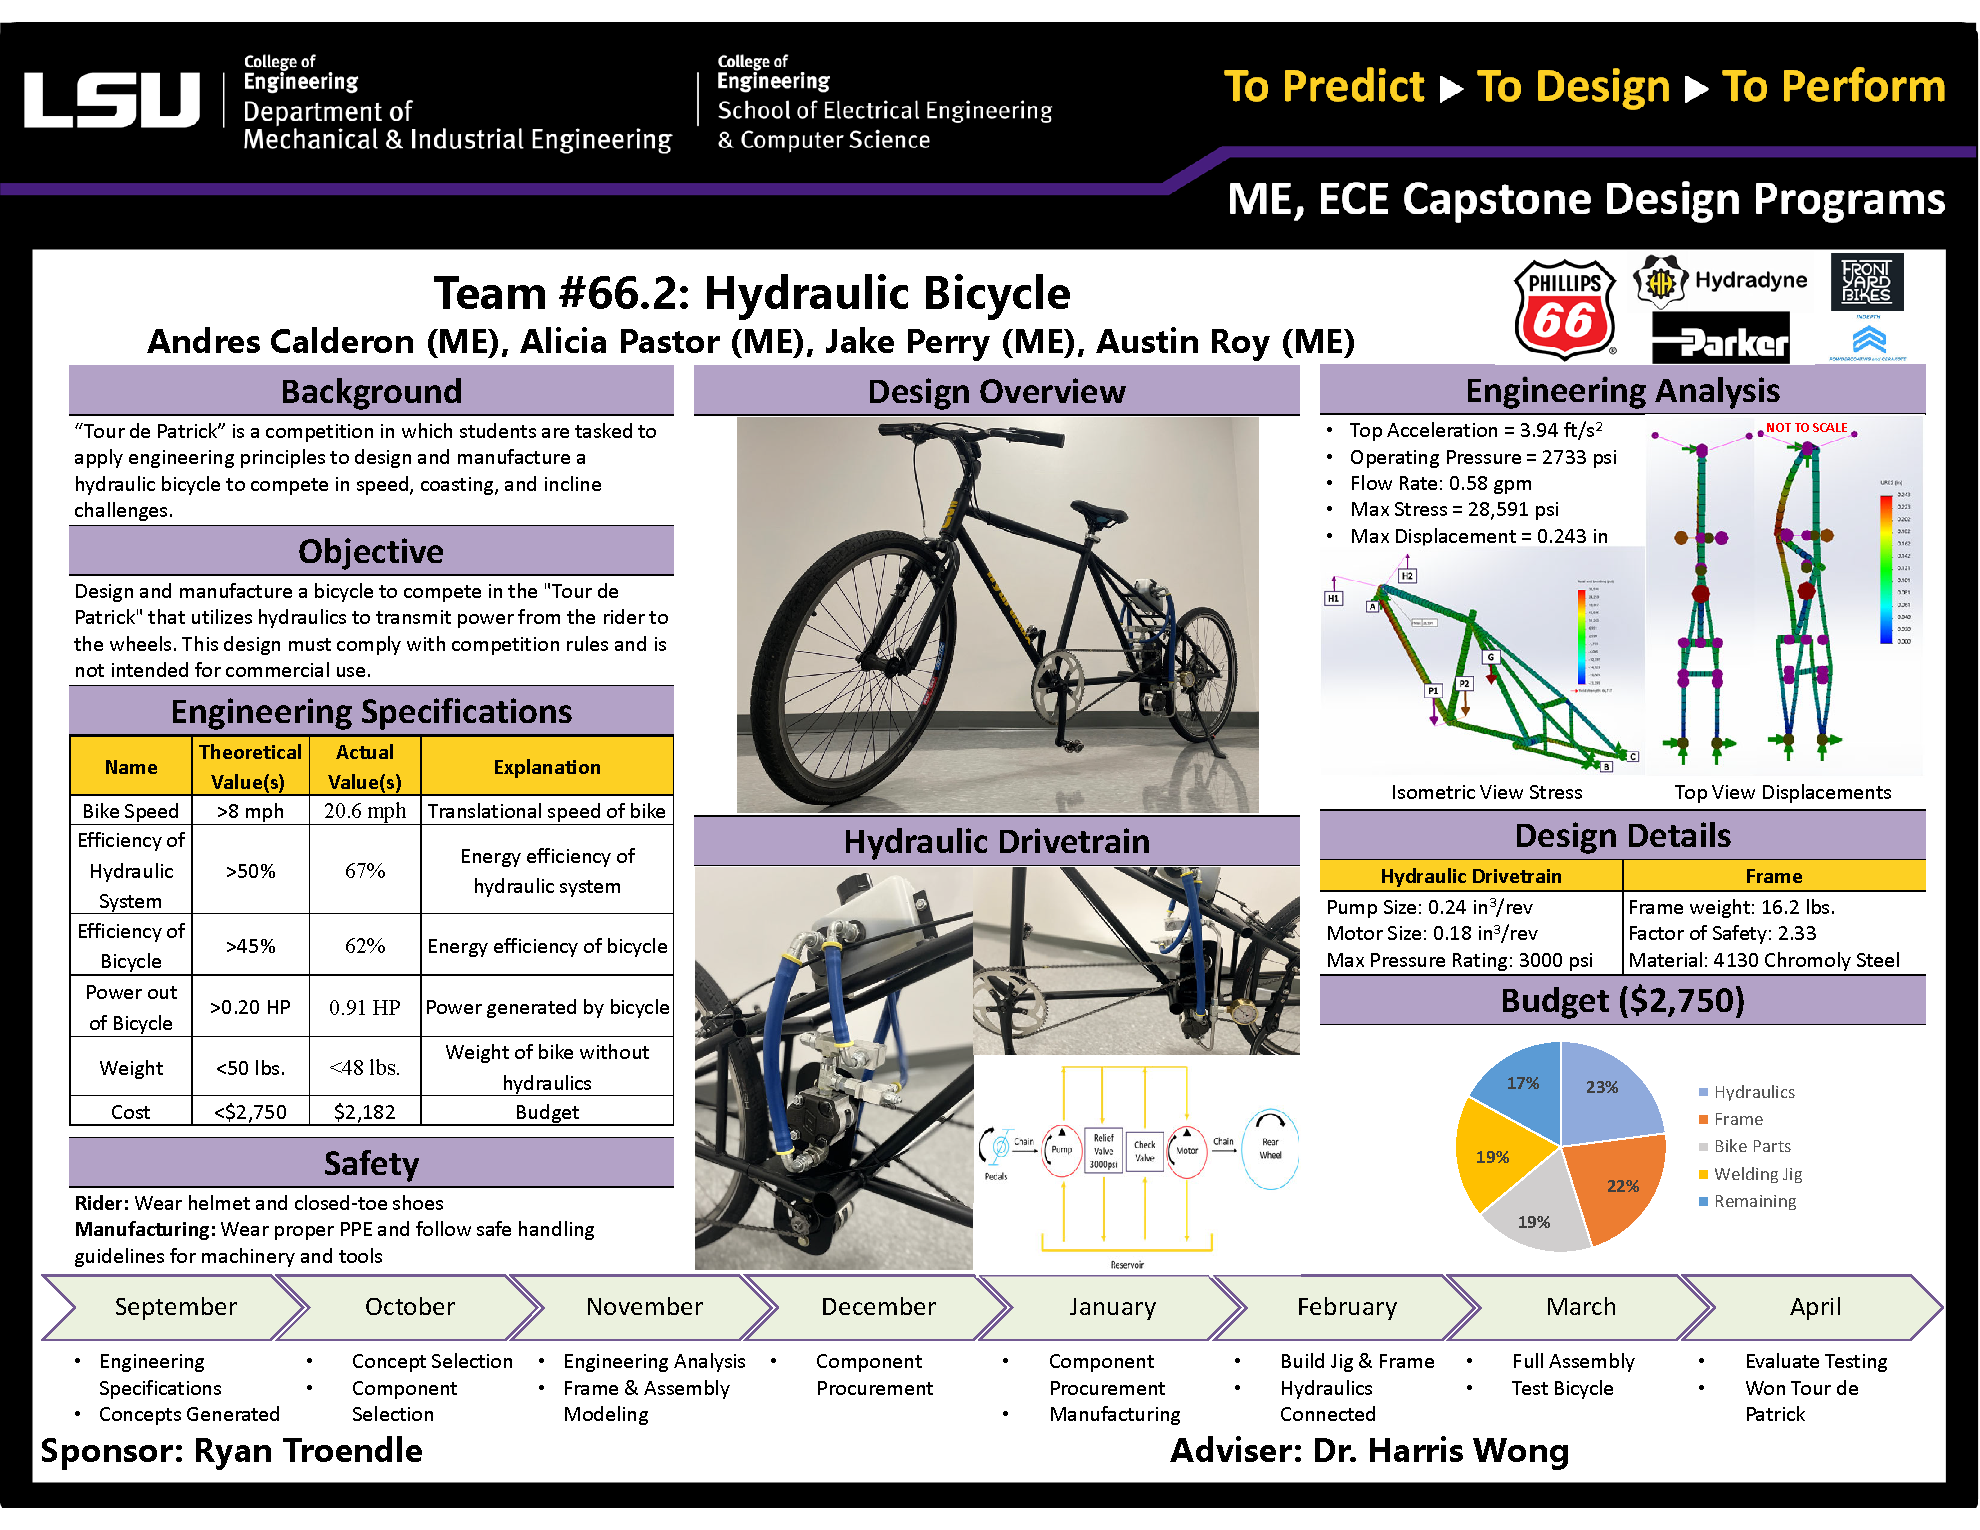 Project 66.2: Hydraulic Bicycle Design (2021)